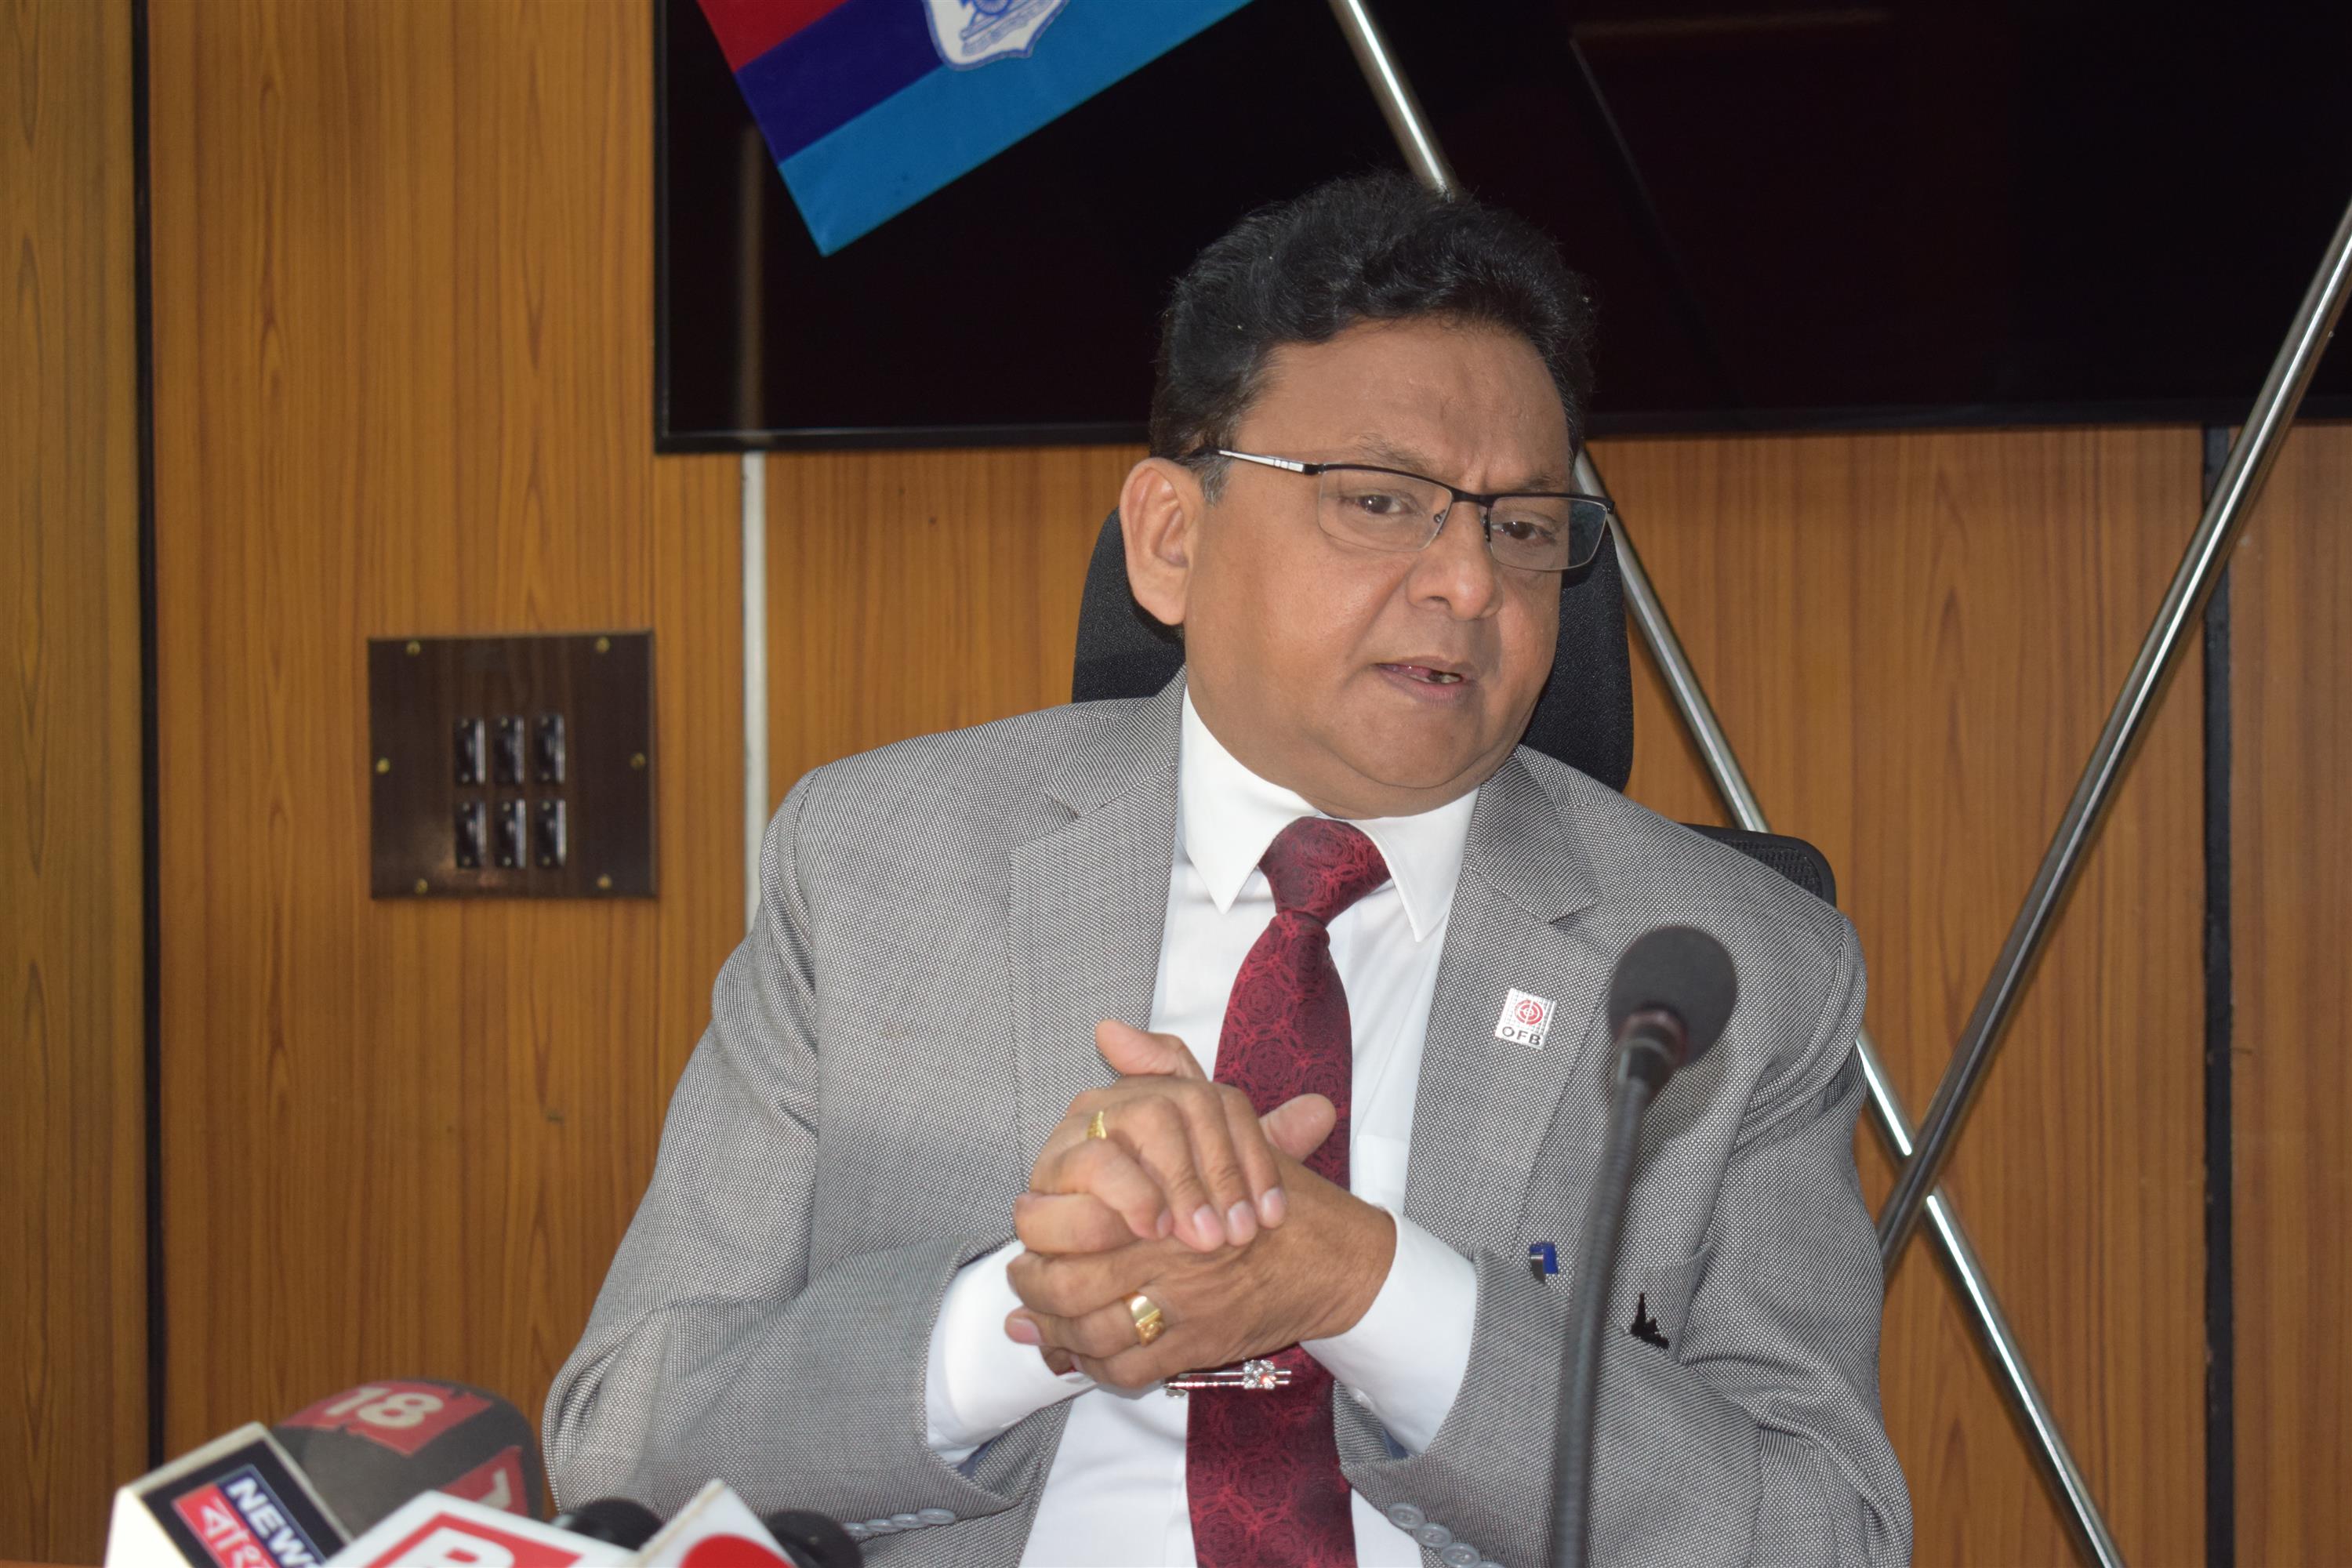 Shri Hari Mohan, Director General of Ordnance Factories and Chairman of Ordnance Factory Board holds a press conference at the Ordnance Factory Board office in Kolkata, 17.03.2020.